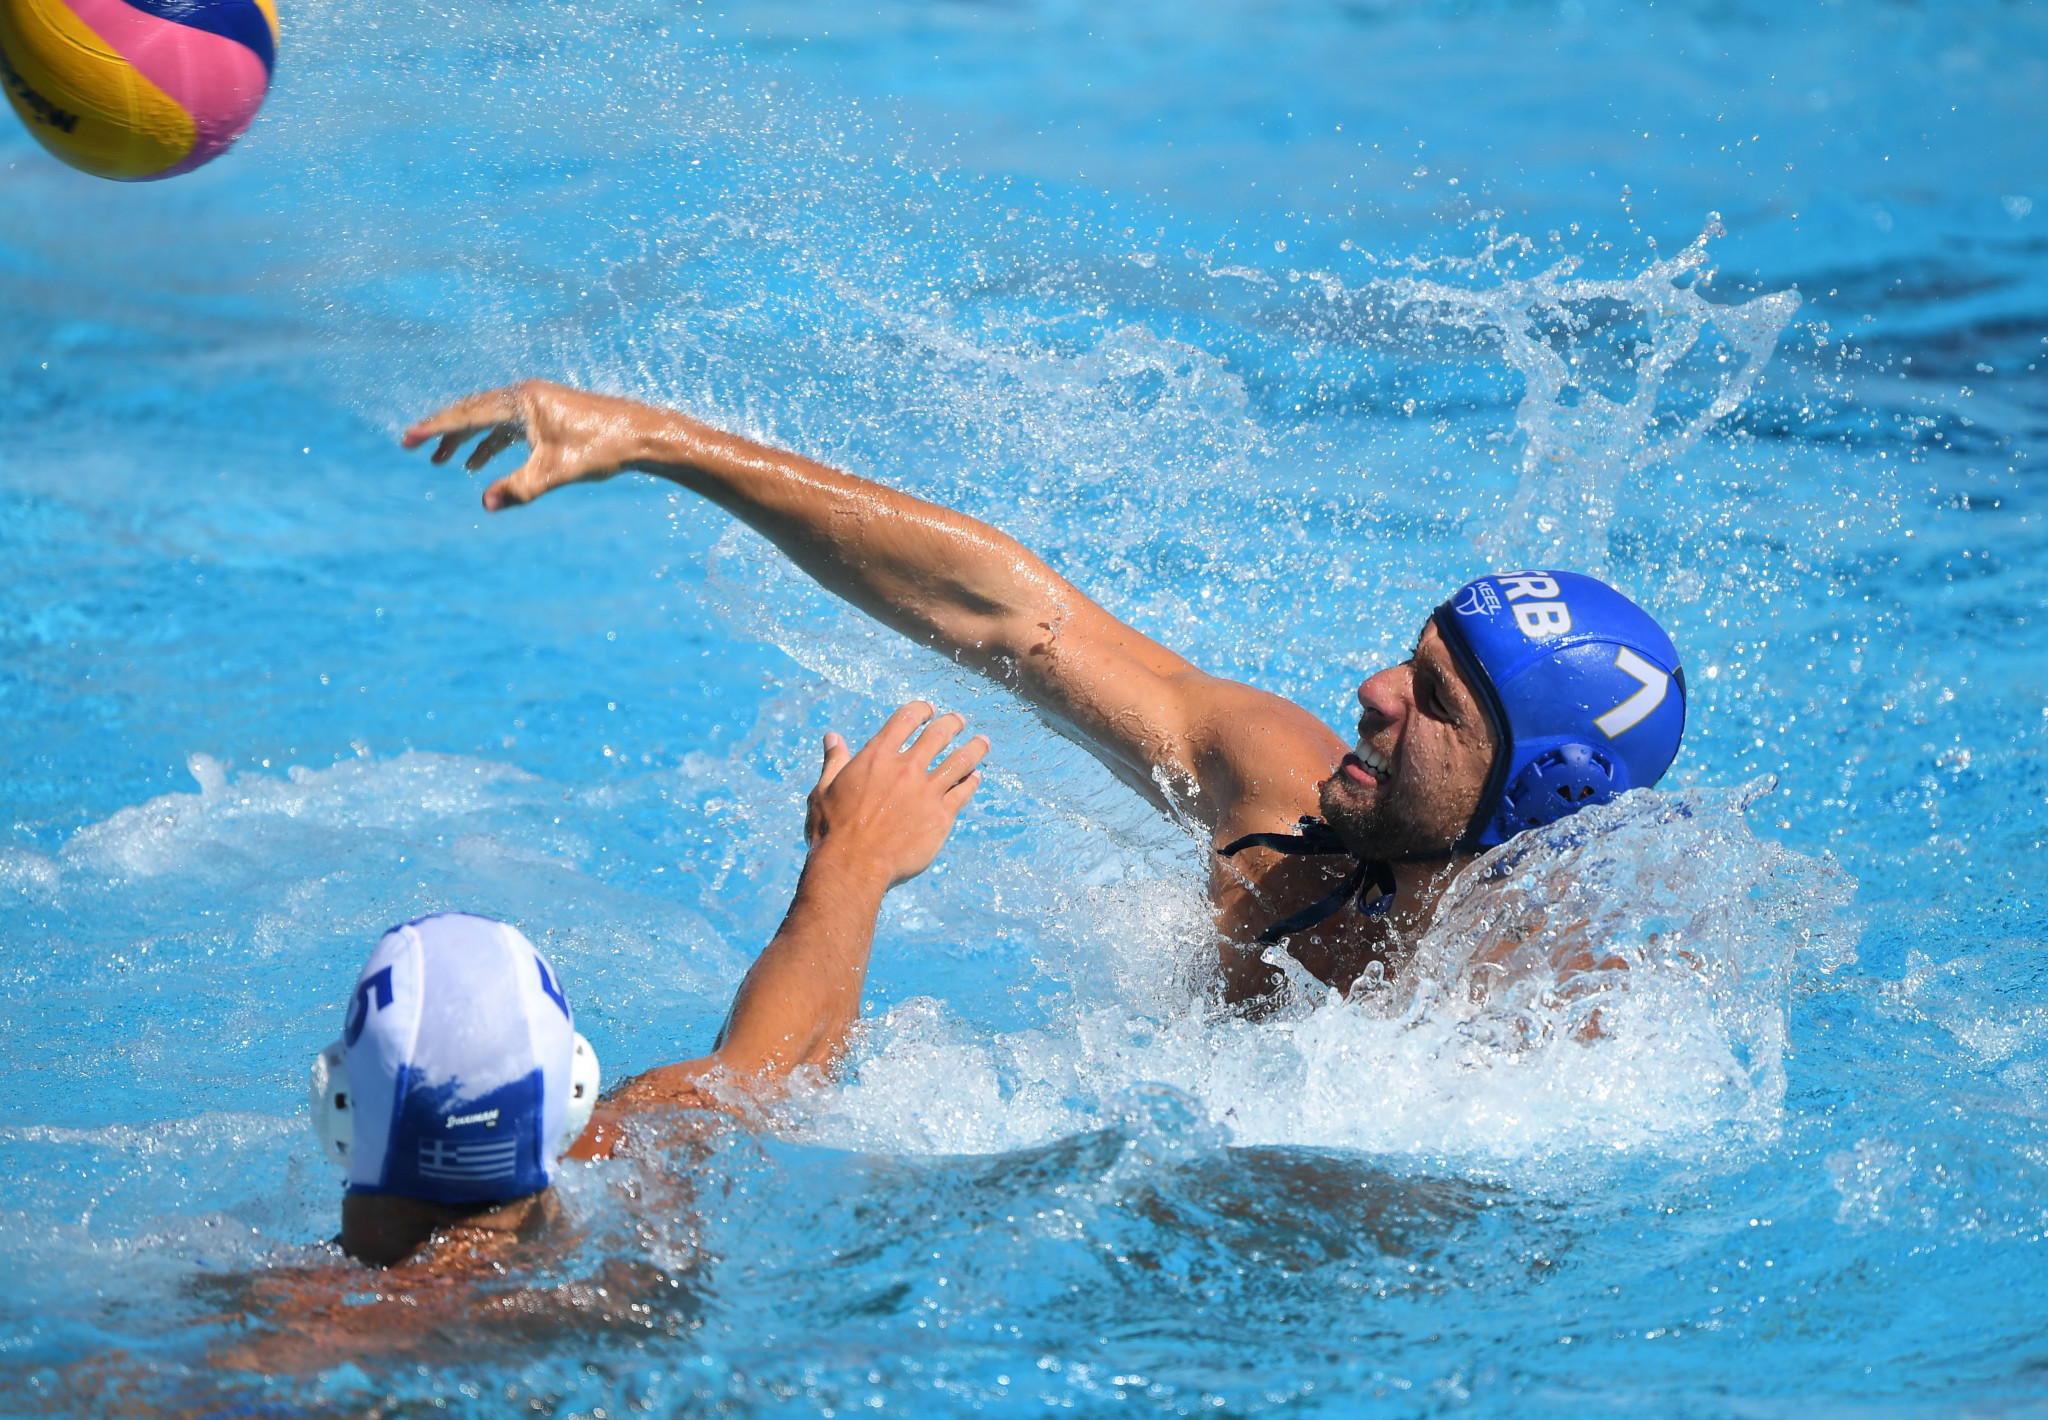 Australia beat reigning world champions to reach semi-finals at Men's Water Polo World Cup